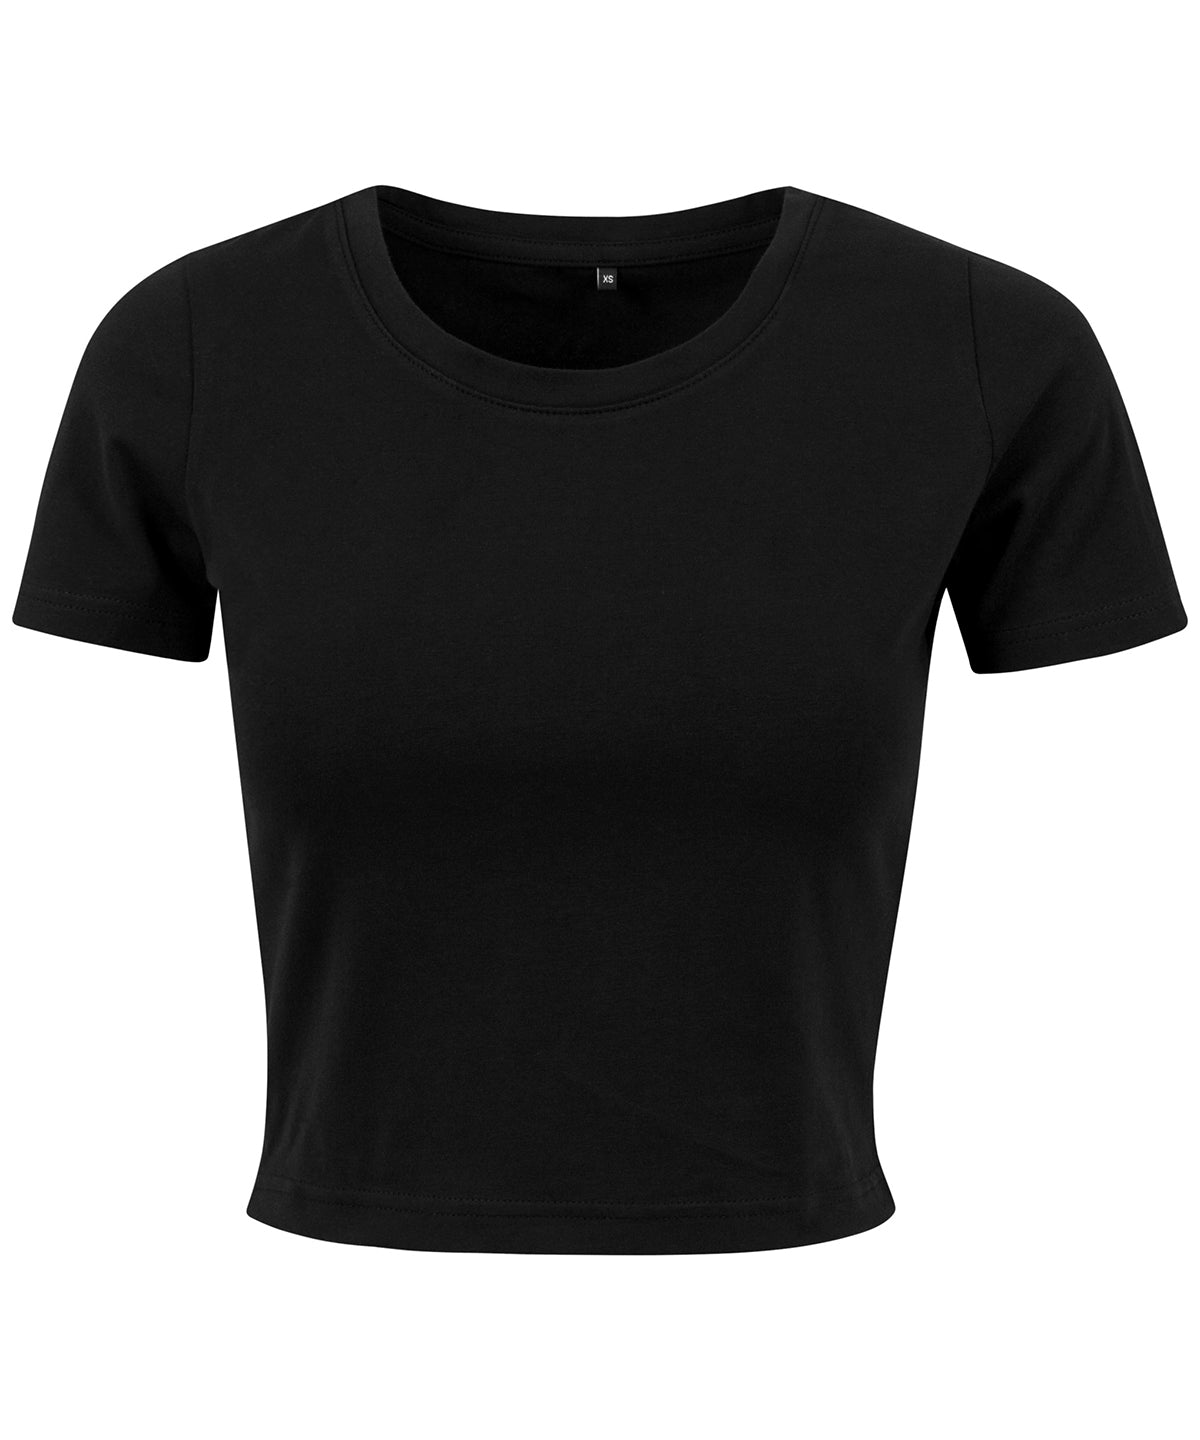 Personalised T-Shirts - Black Build Your Brand Women's cropped tee